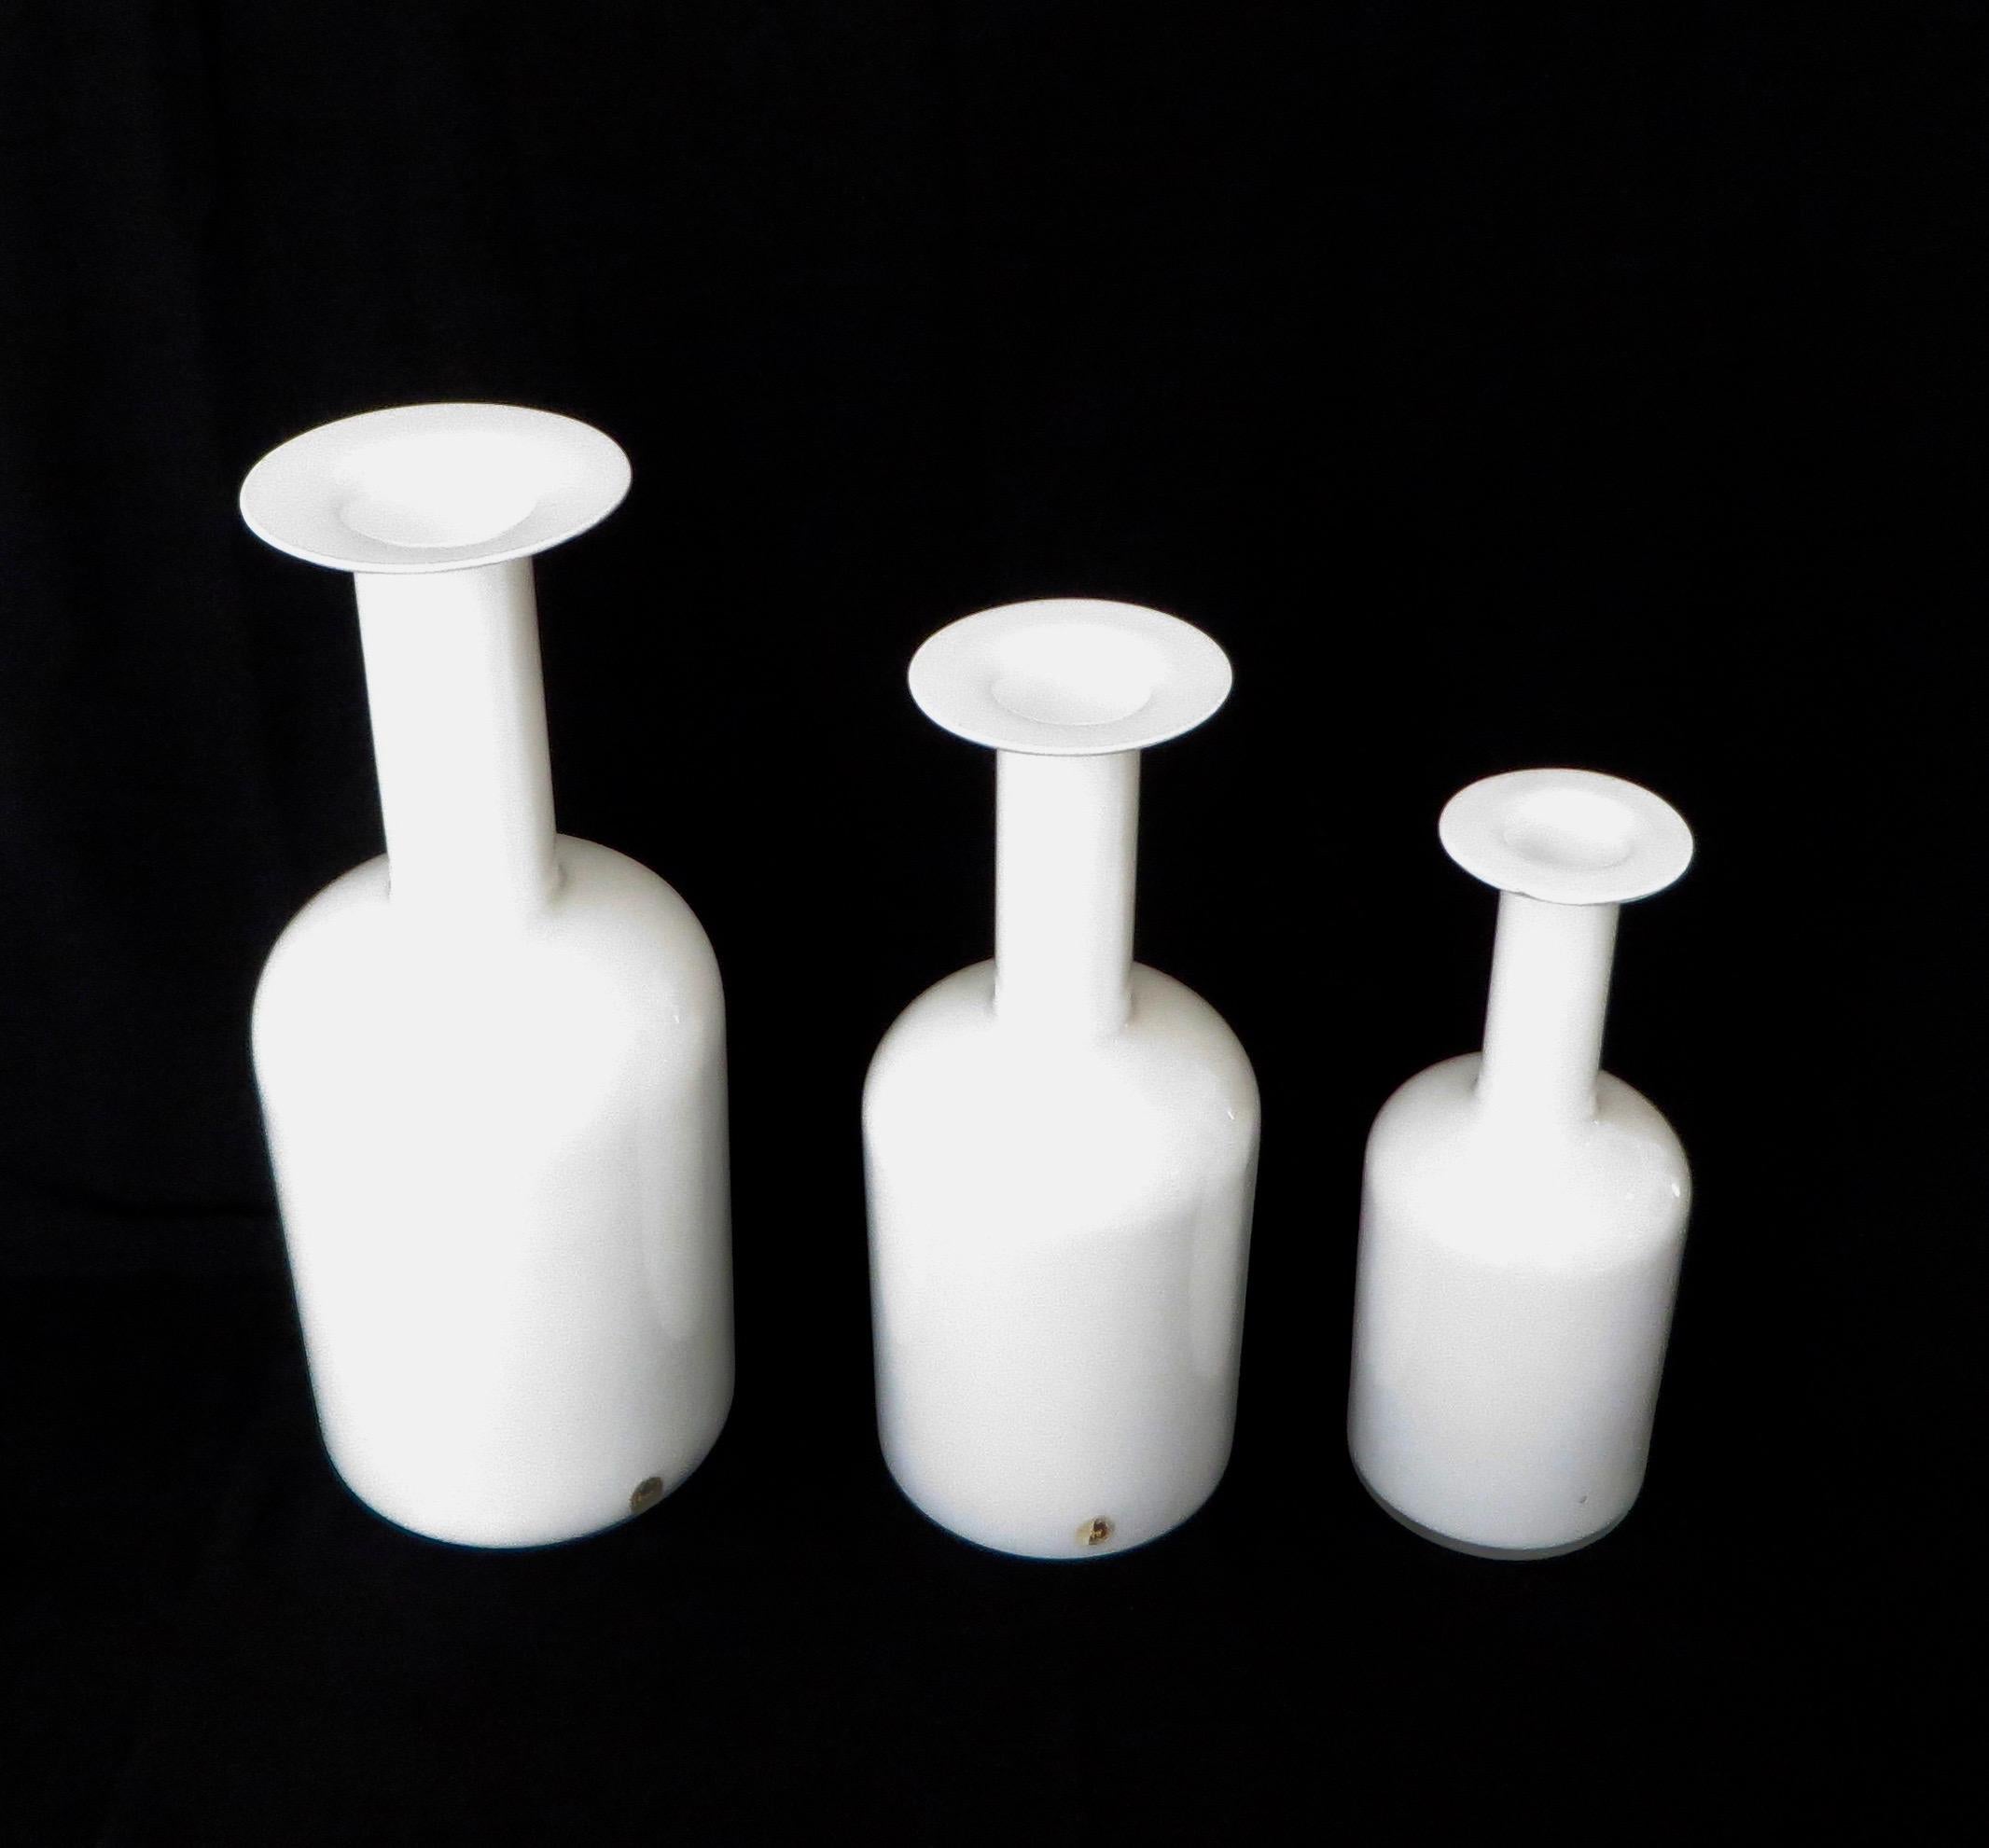 Set of three cased white mouth blown glass Vases by Kastrup
Holmegaard, Denmark, circa 1970.
Holmegaard opaque white glass Gulvvase designed by Otto Brauer in 1962, based on a 1958 design by Per Lutken.
Two with their original label.
Sizes of